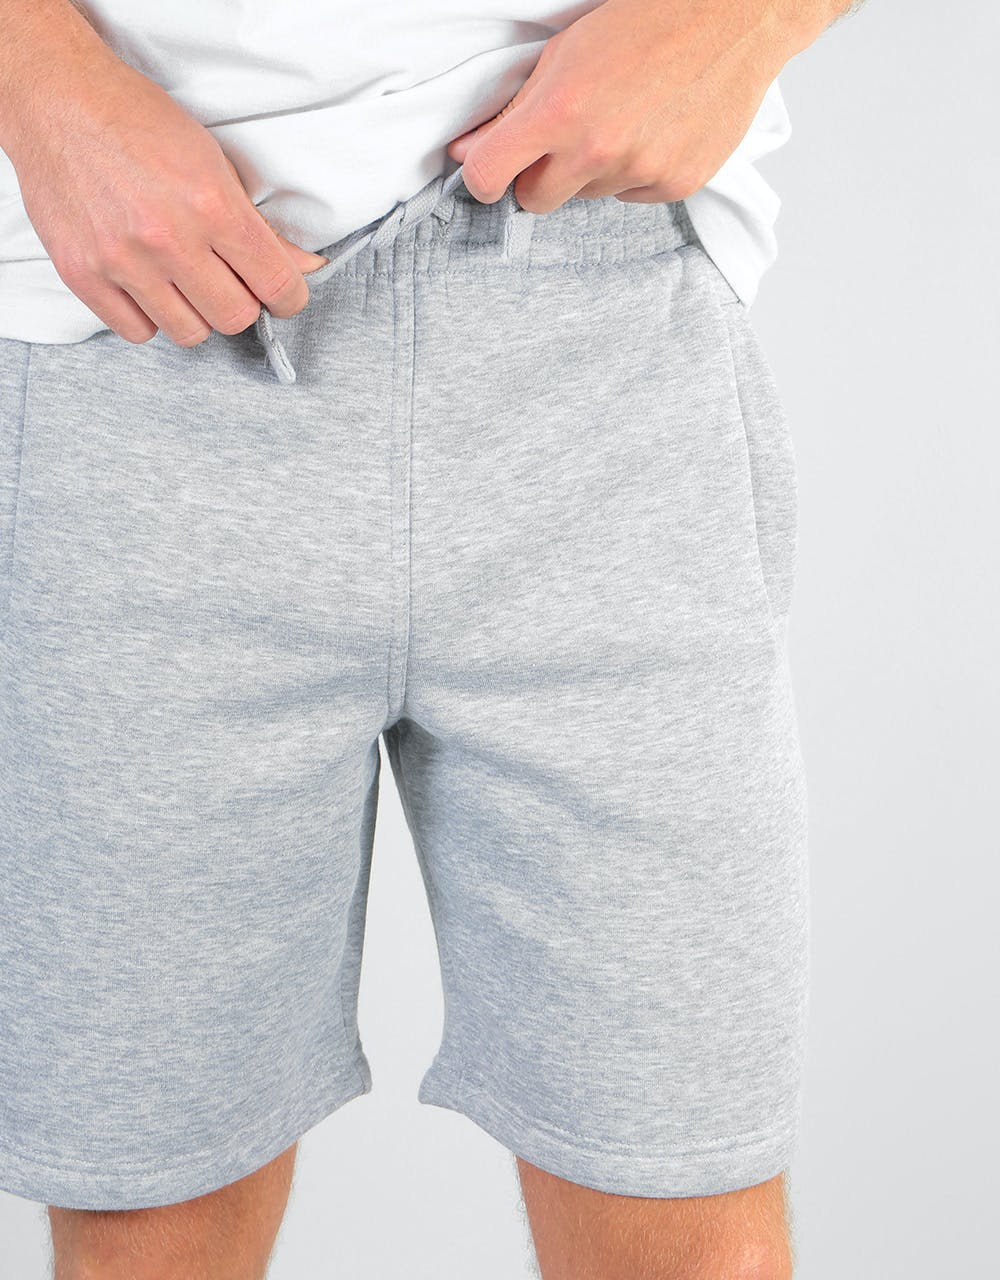 Route One Sweat Shorts - Light Grey Marl